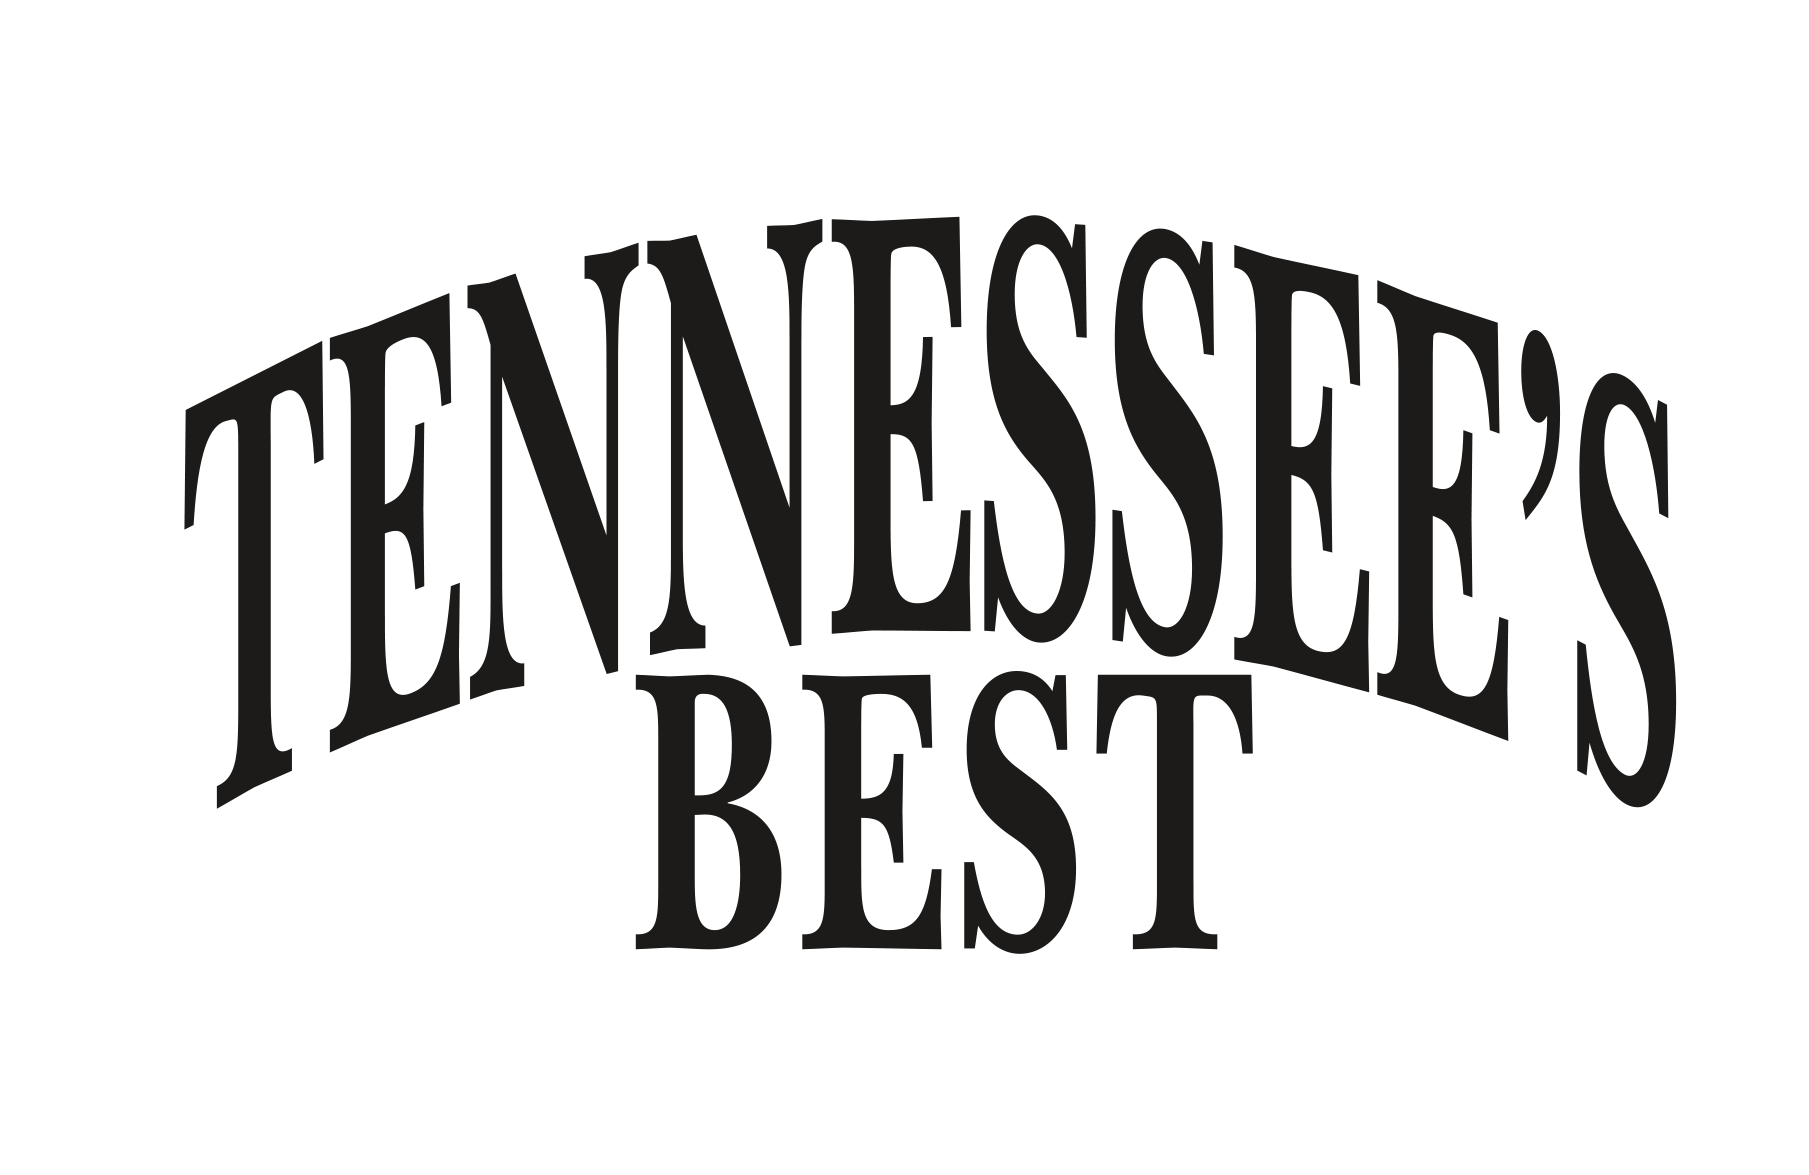 Tennessee’s Best